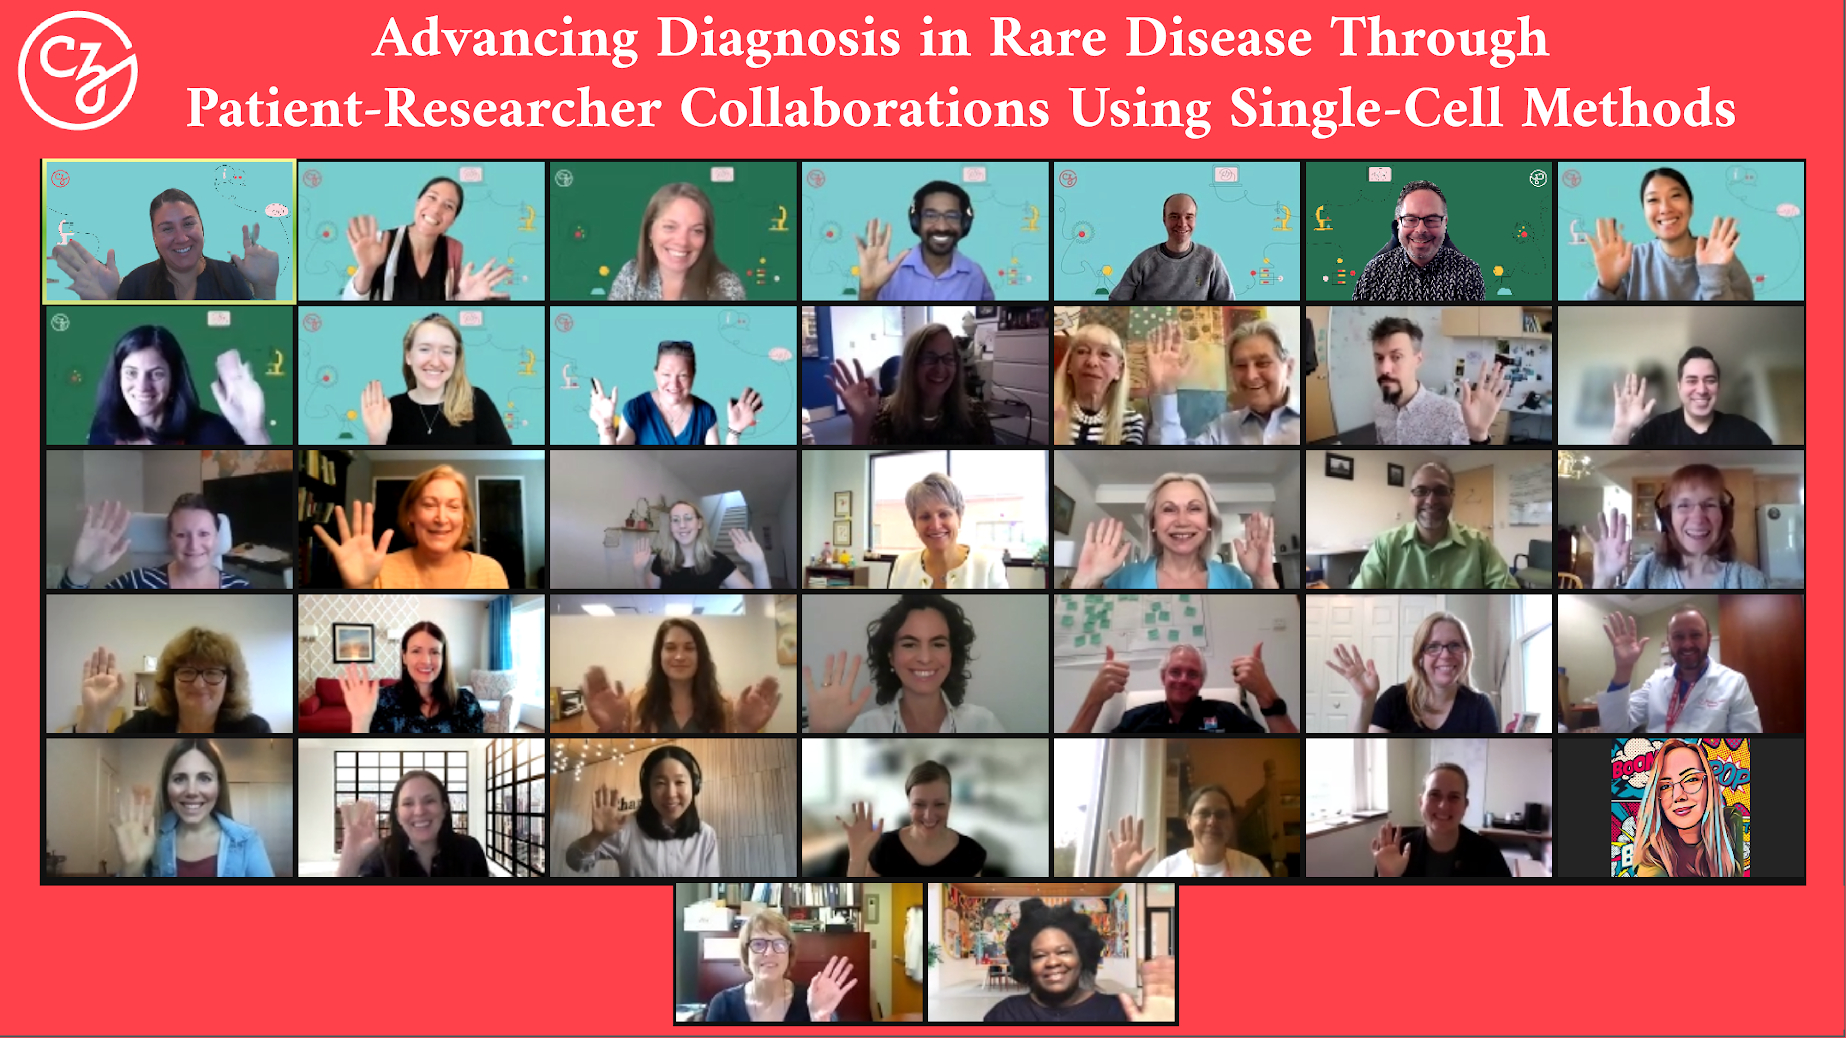 Participants at CZI’s Advancing Diagnosis in Rare Disease Through Patient-Researcher Collaborations Using Single-Cell Methods Workshop pose waving on the Zoom platform.